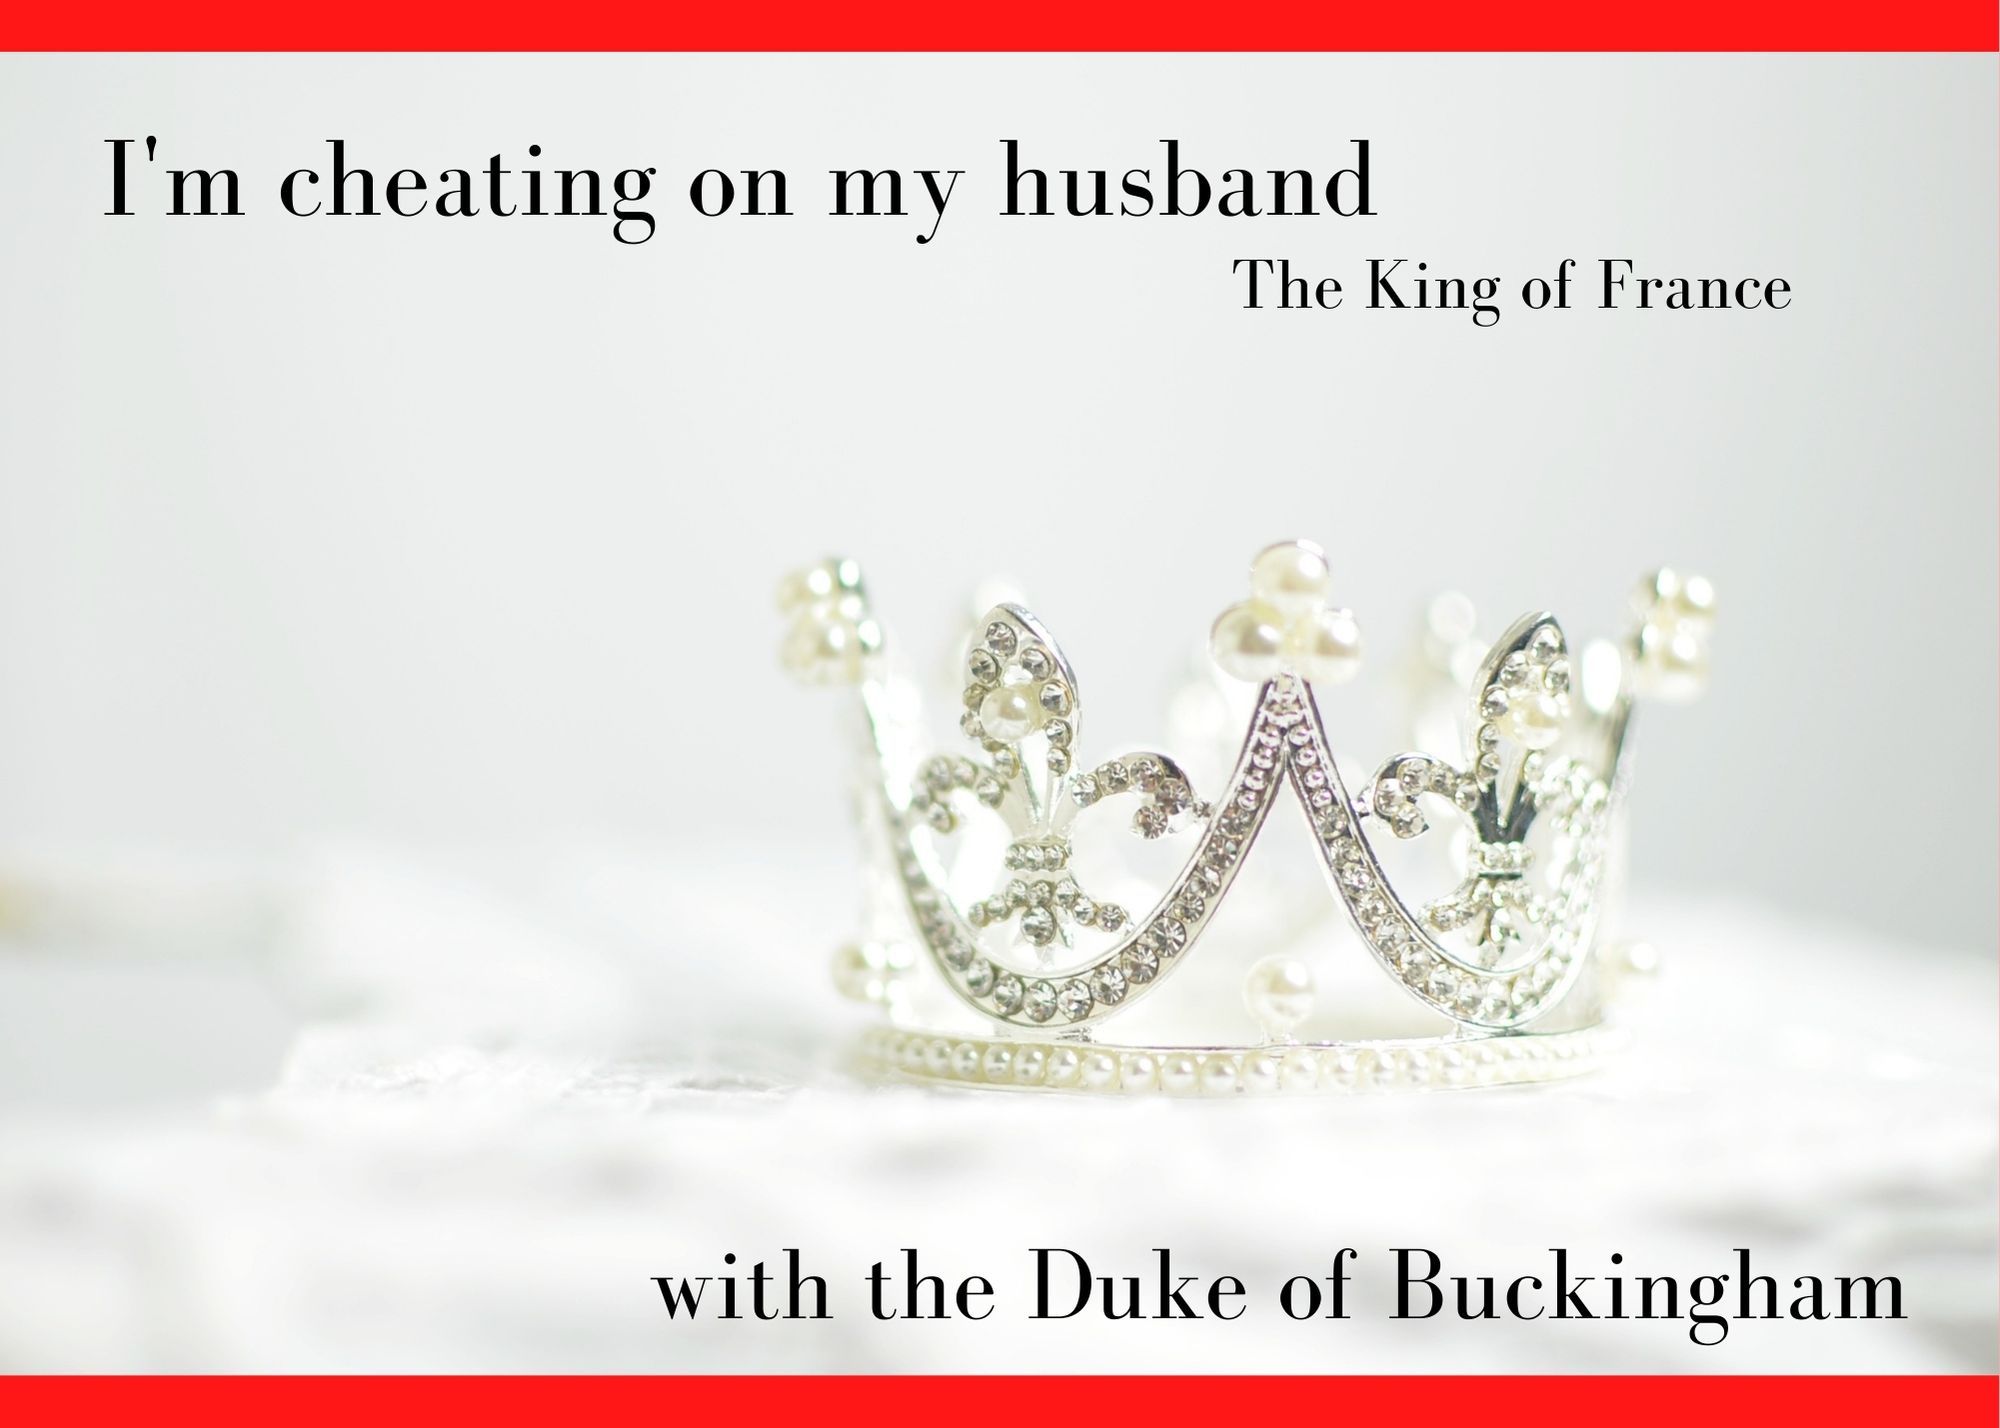 image of a diamond crown with the words "I'm cheating on my husband the King of France with the Duke of Buckingham"